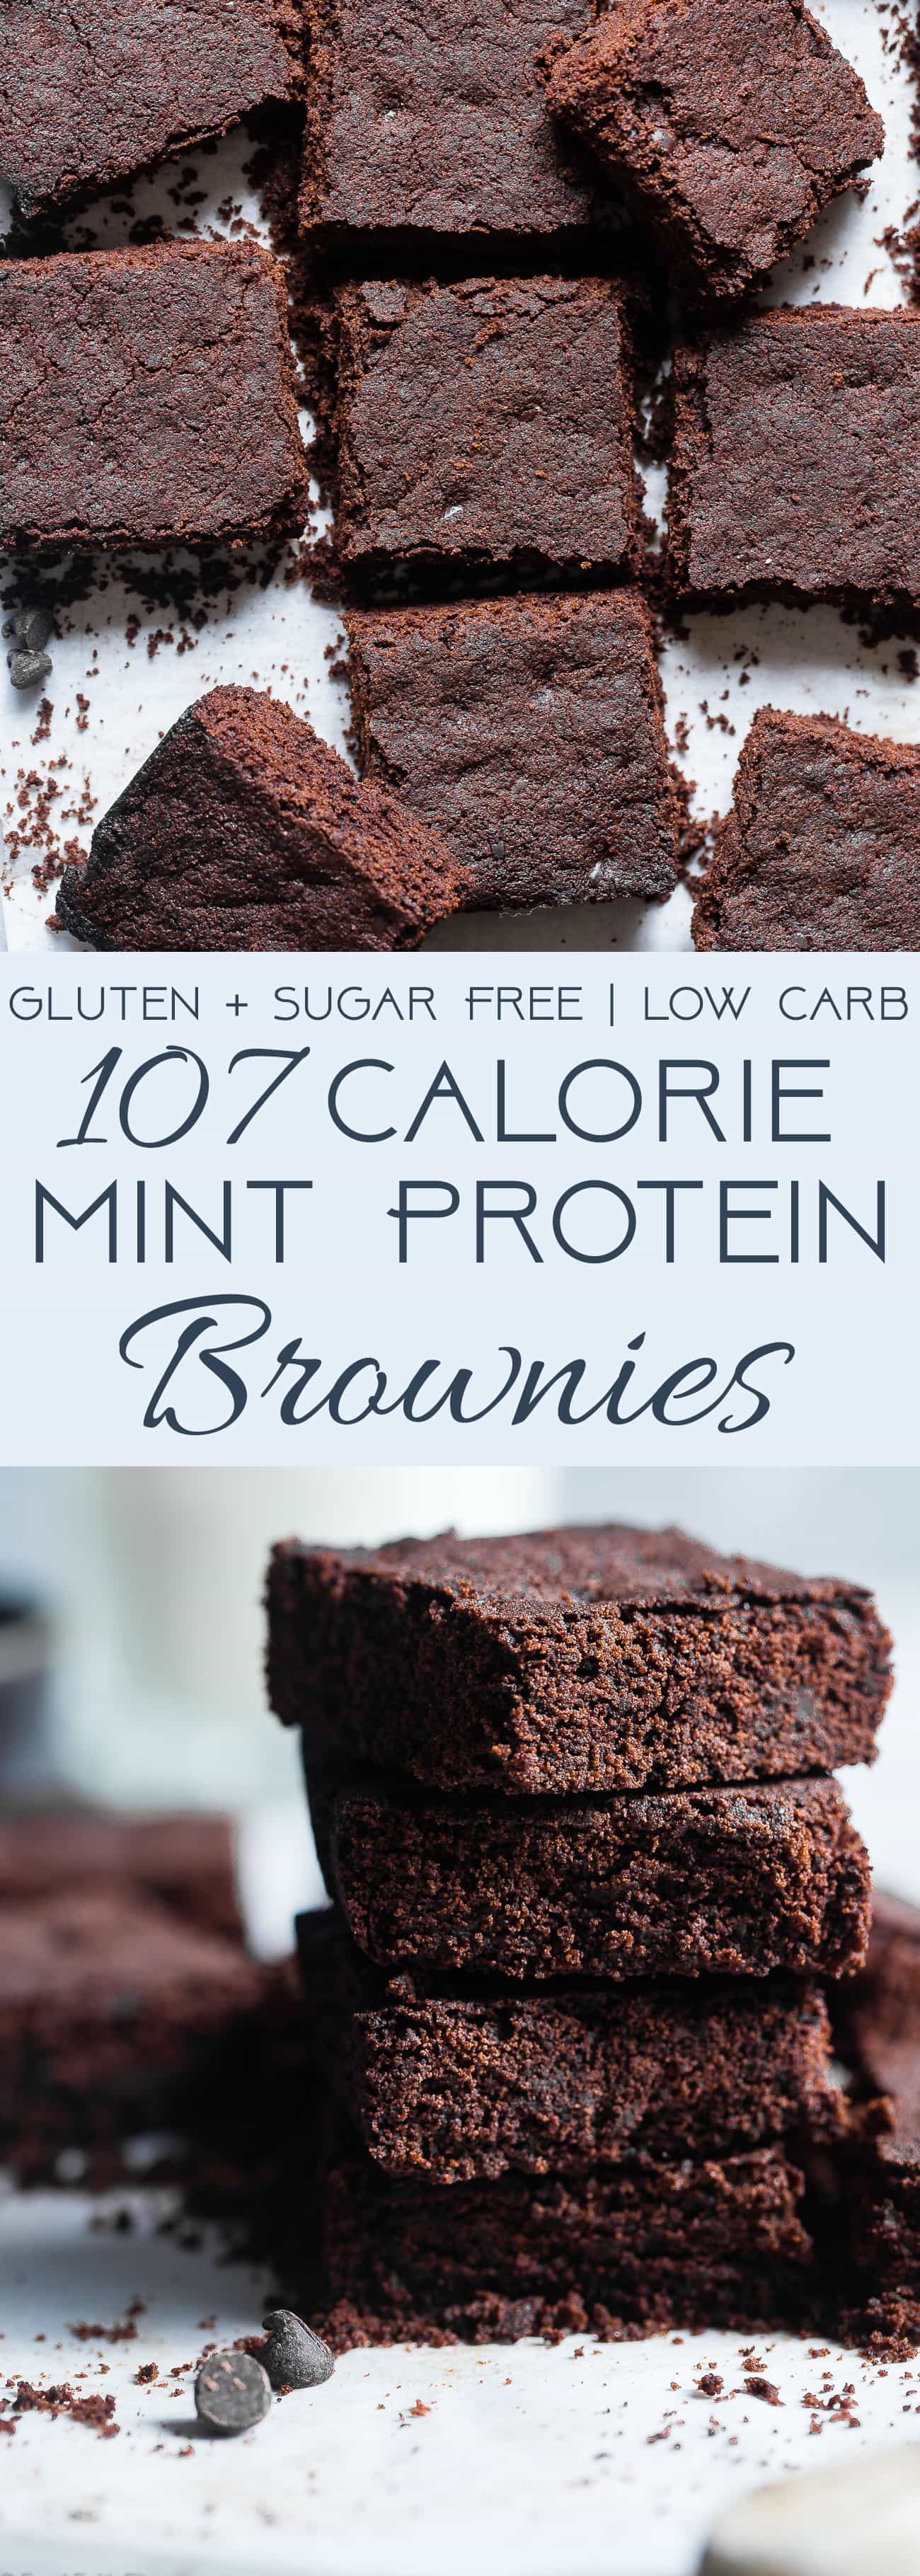 Low Carb Keto Protein Brownies - SO dense and chewy you would never believe they are only 107 calories and sugar/grain/dairy/gluten free and paleo friendly! The perfect healthy treat! | Foodfaithfitness.com | @FoodFaithFit | paleo brownies. keto brownies. low carb brownies. gluten free brownies. mint chocolate brownies.